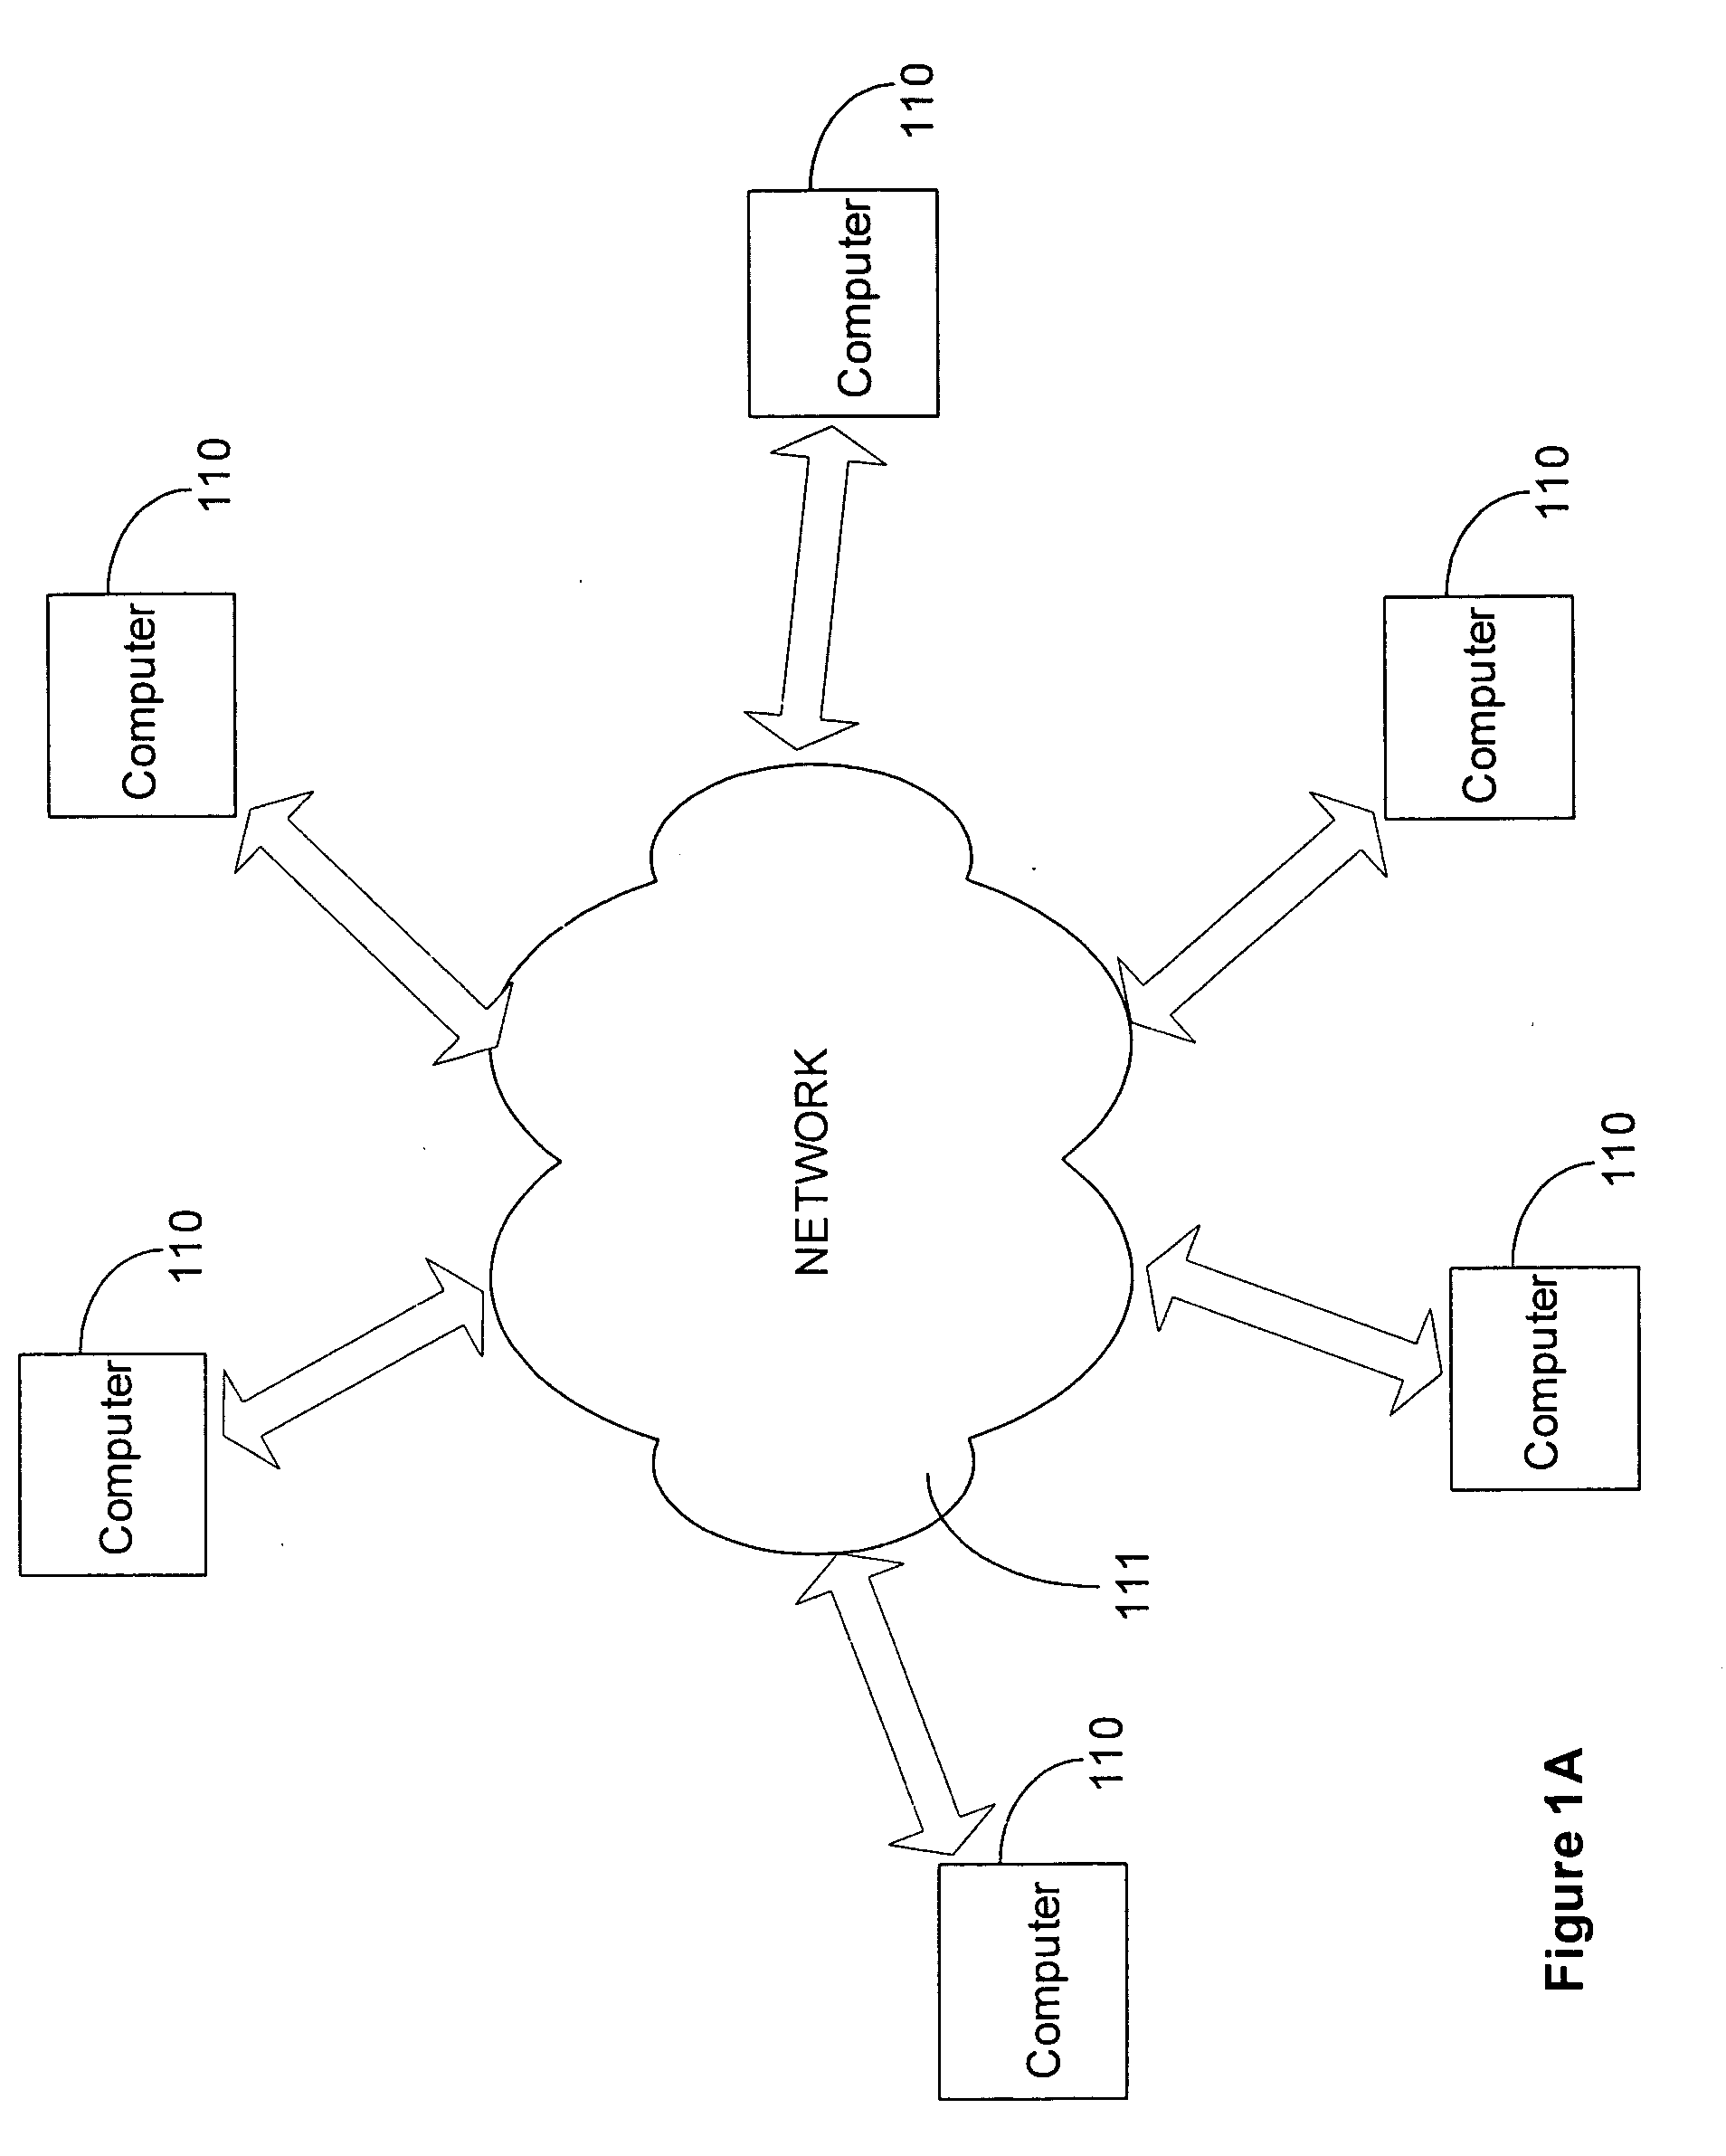 Method for efficiently mapping error messages to unique identifiers